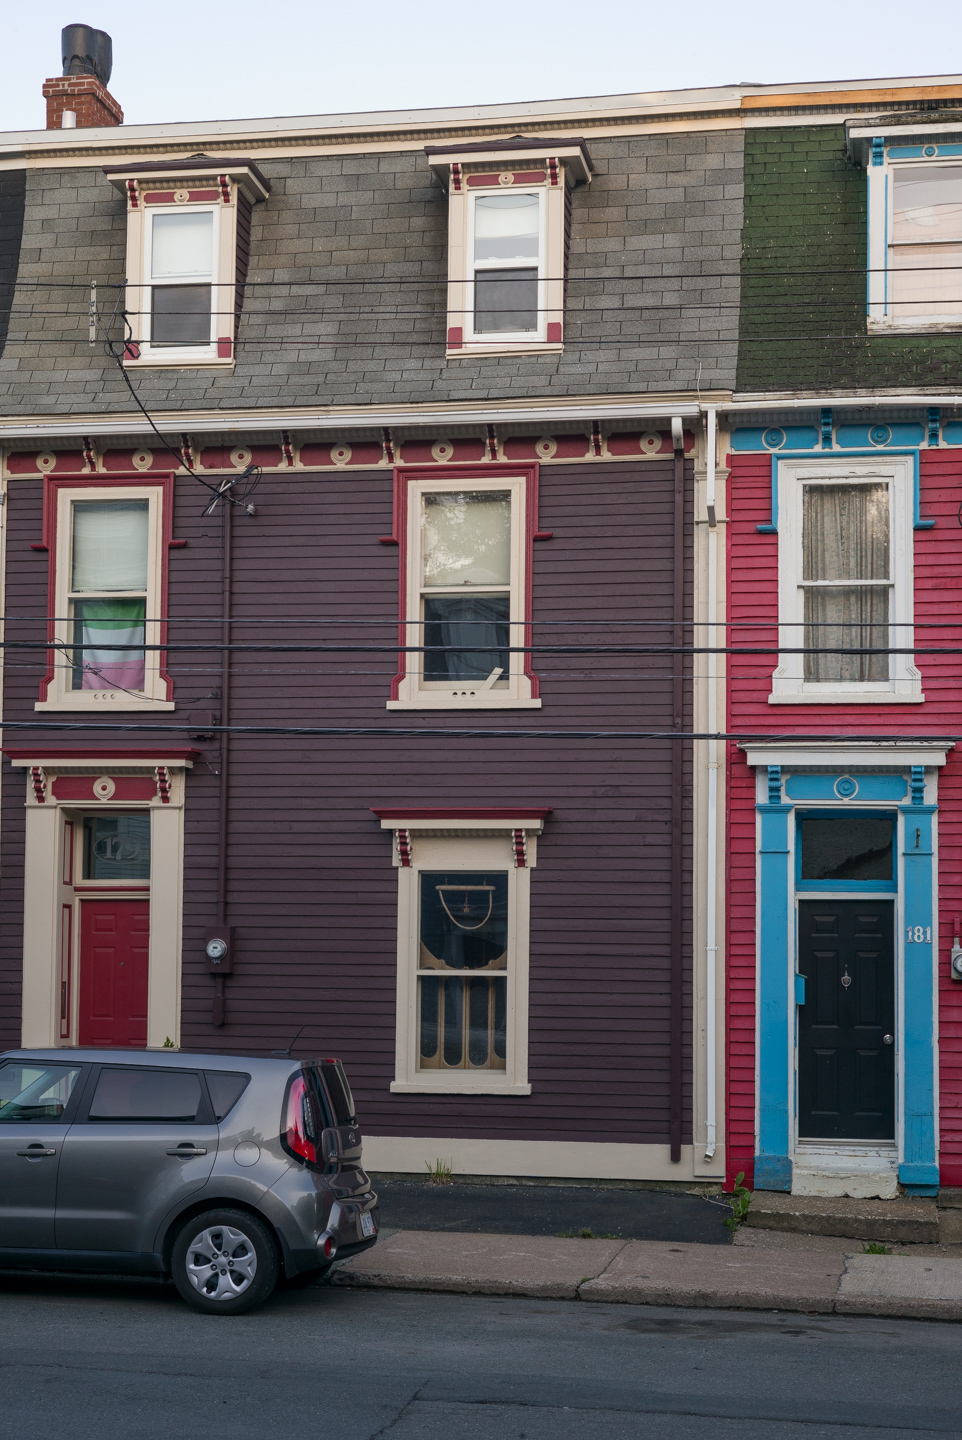 The Pink, White, and Green. St. John’s, Newfoundland 2016